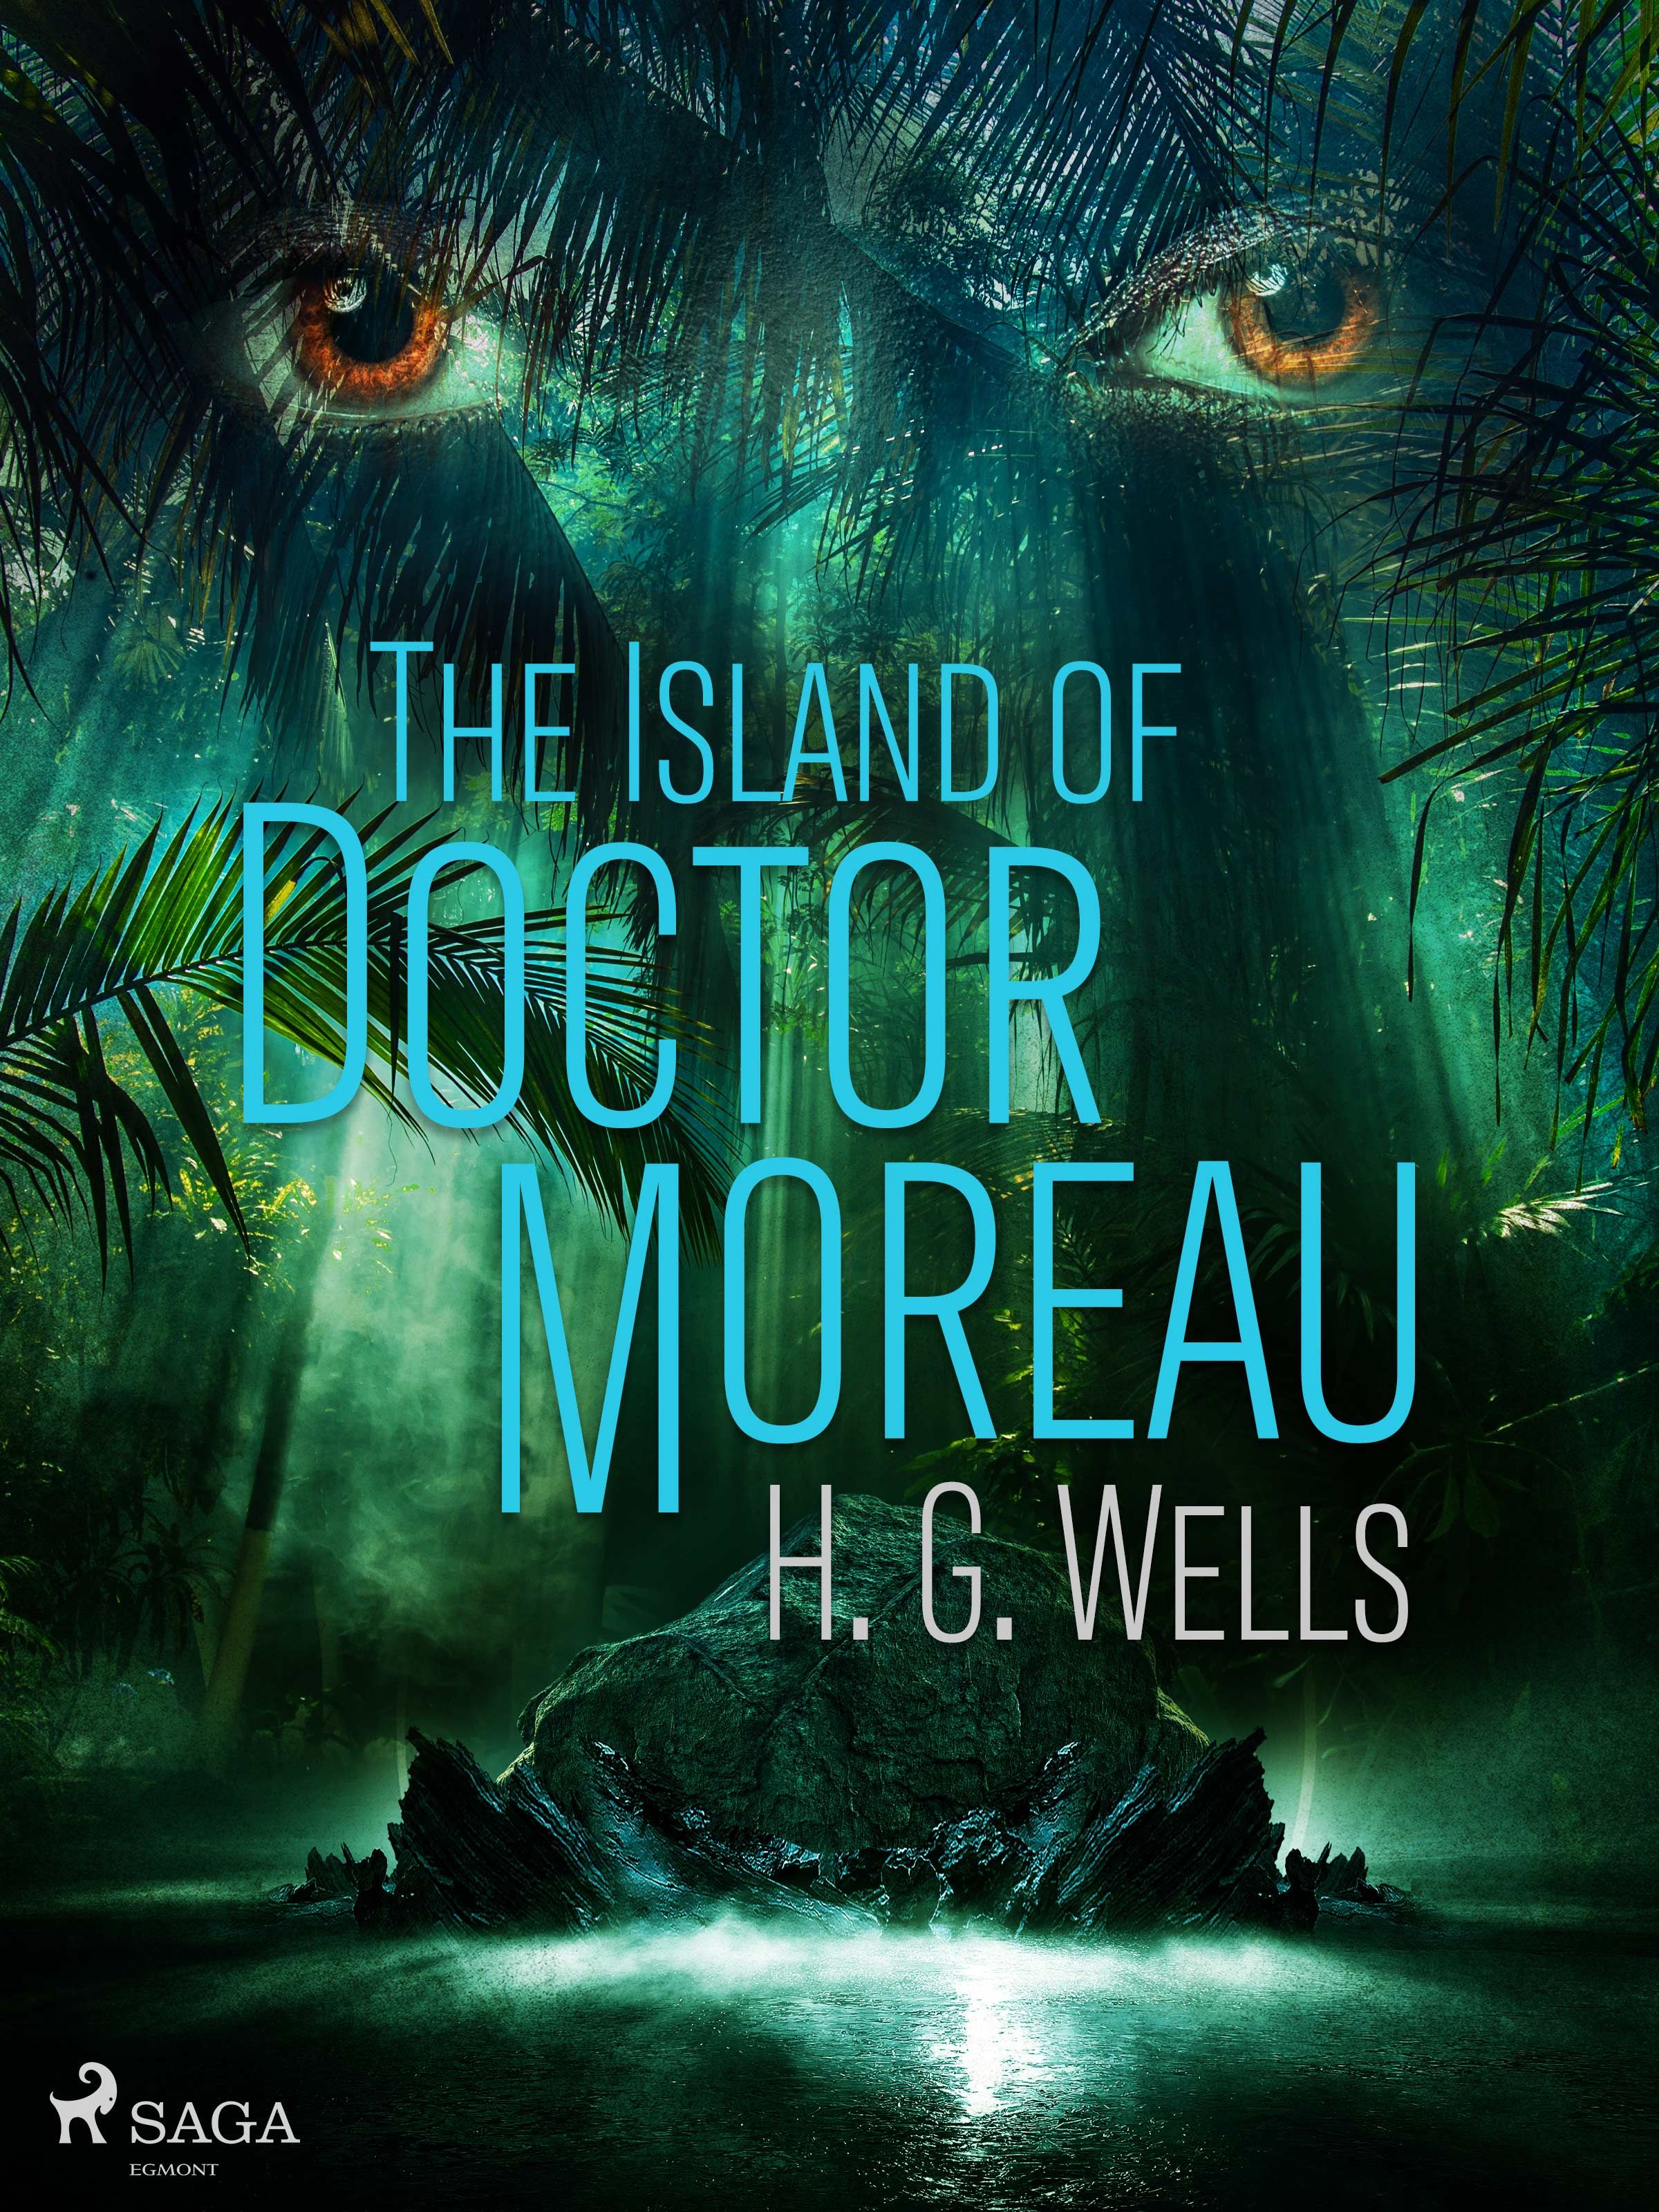 The Island of Doctor Moreau, eBook by H. G. Wells